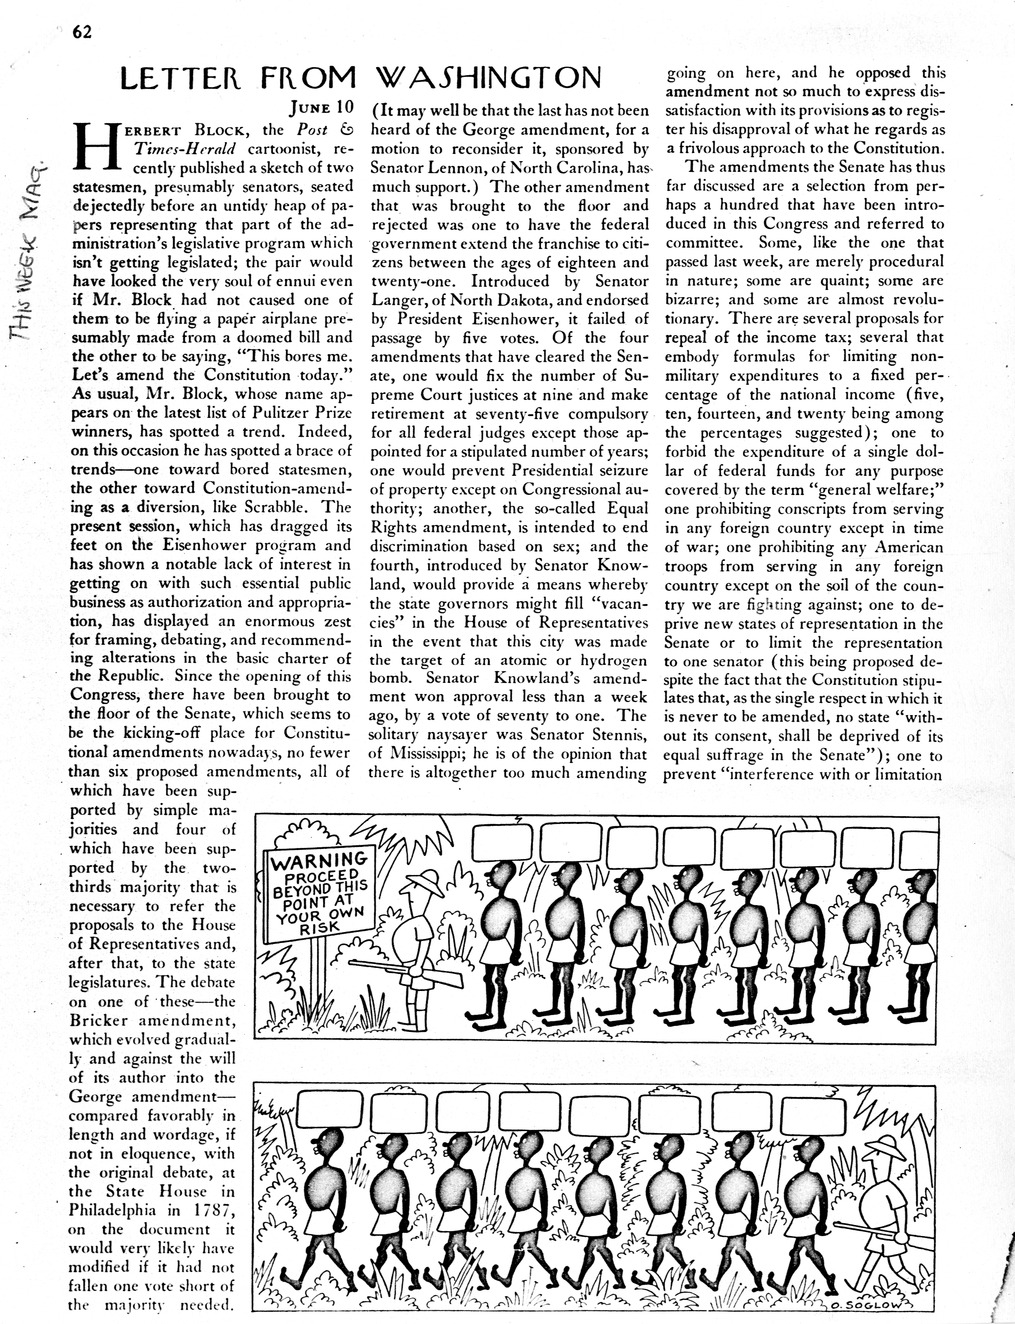 Magazine Article from the New Yorker, Letter from Washington, by Richard Rovere